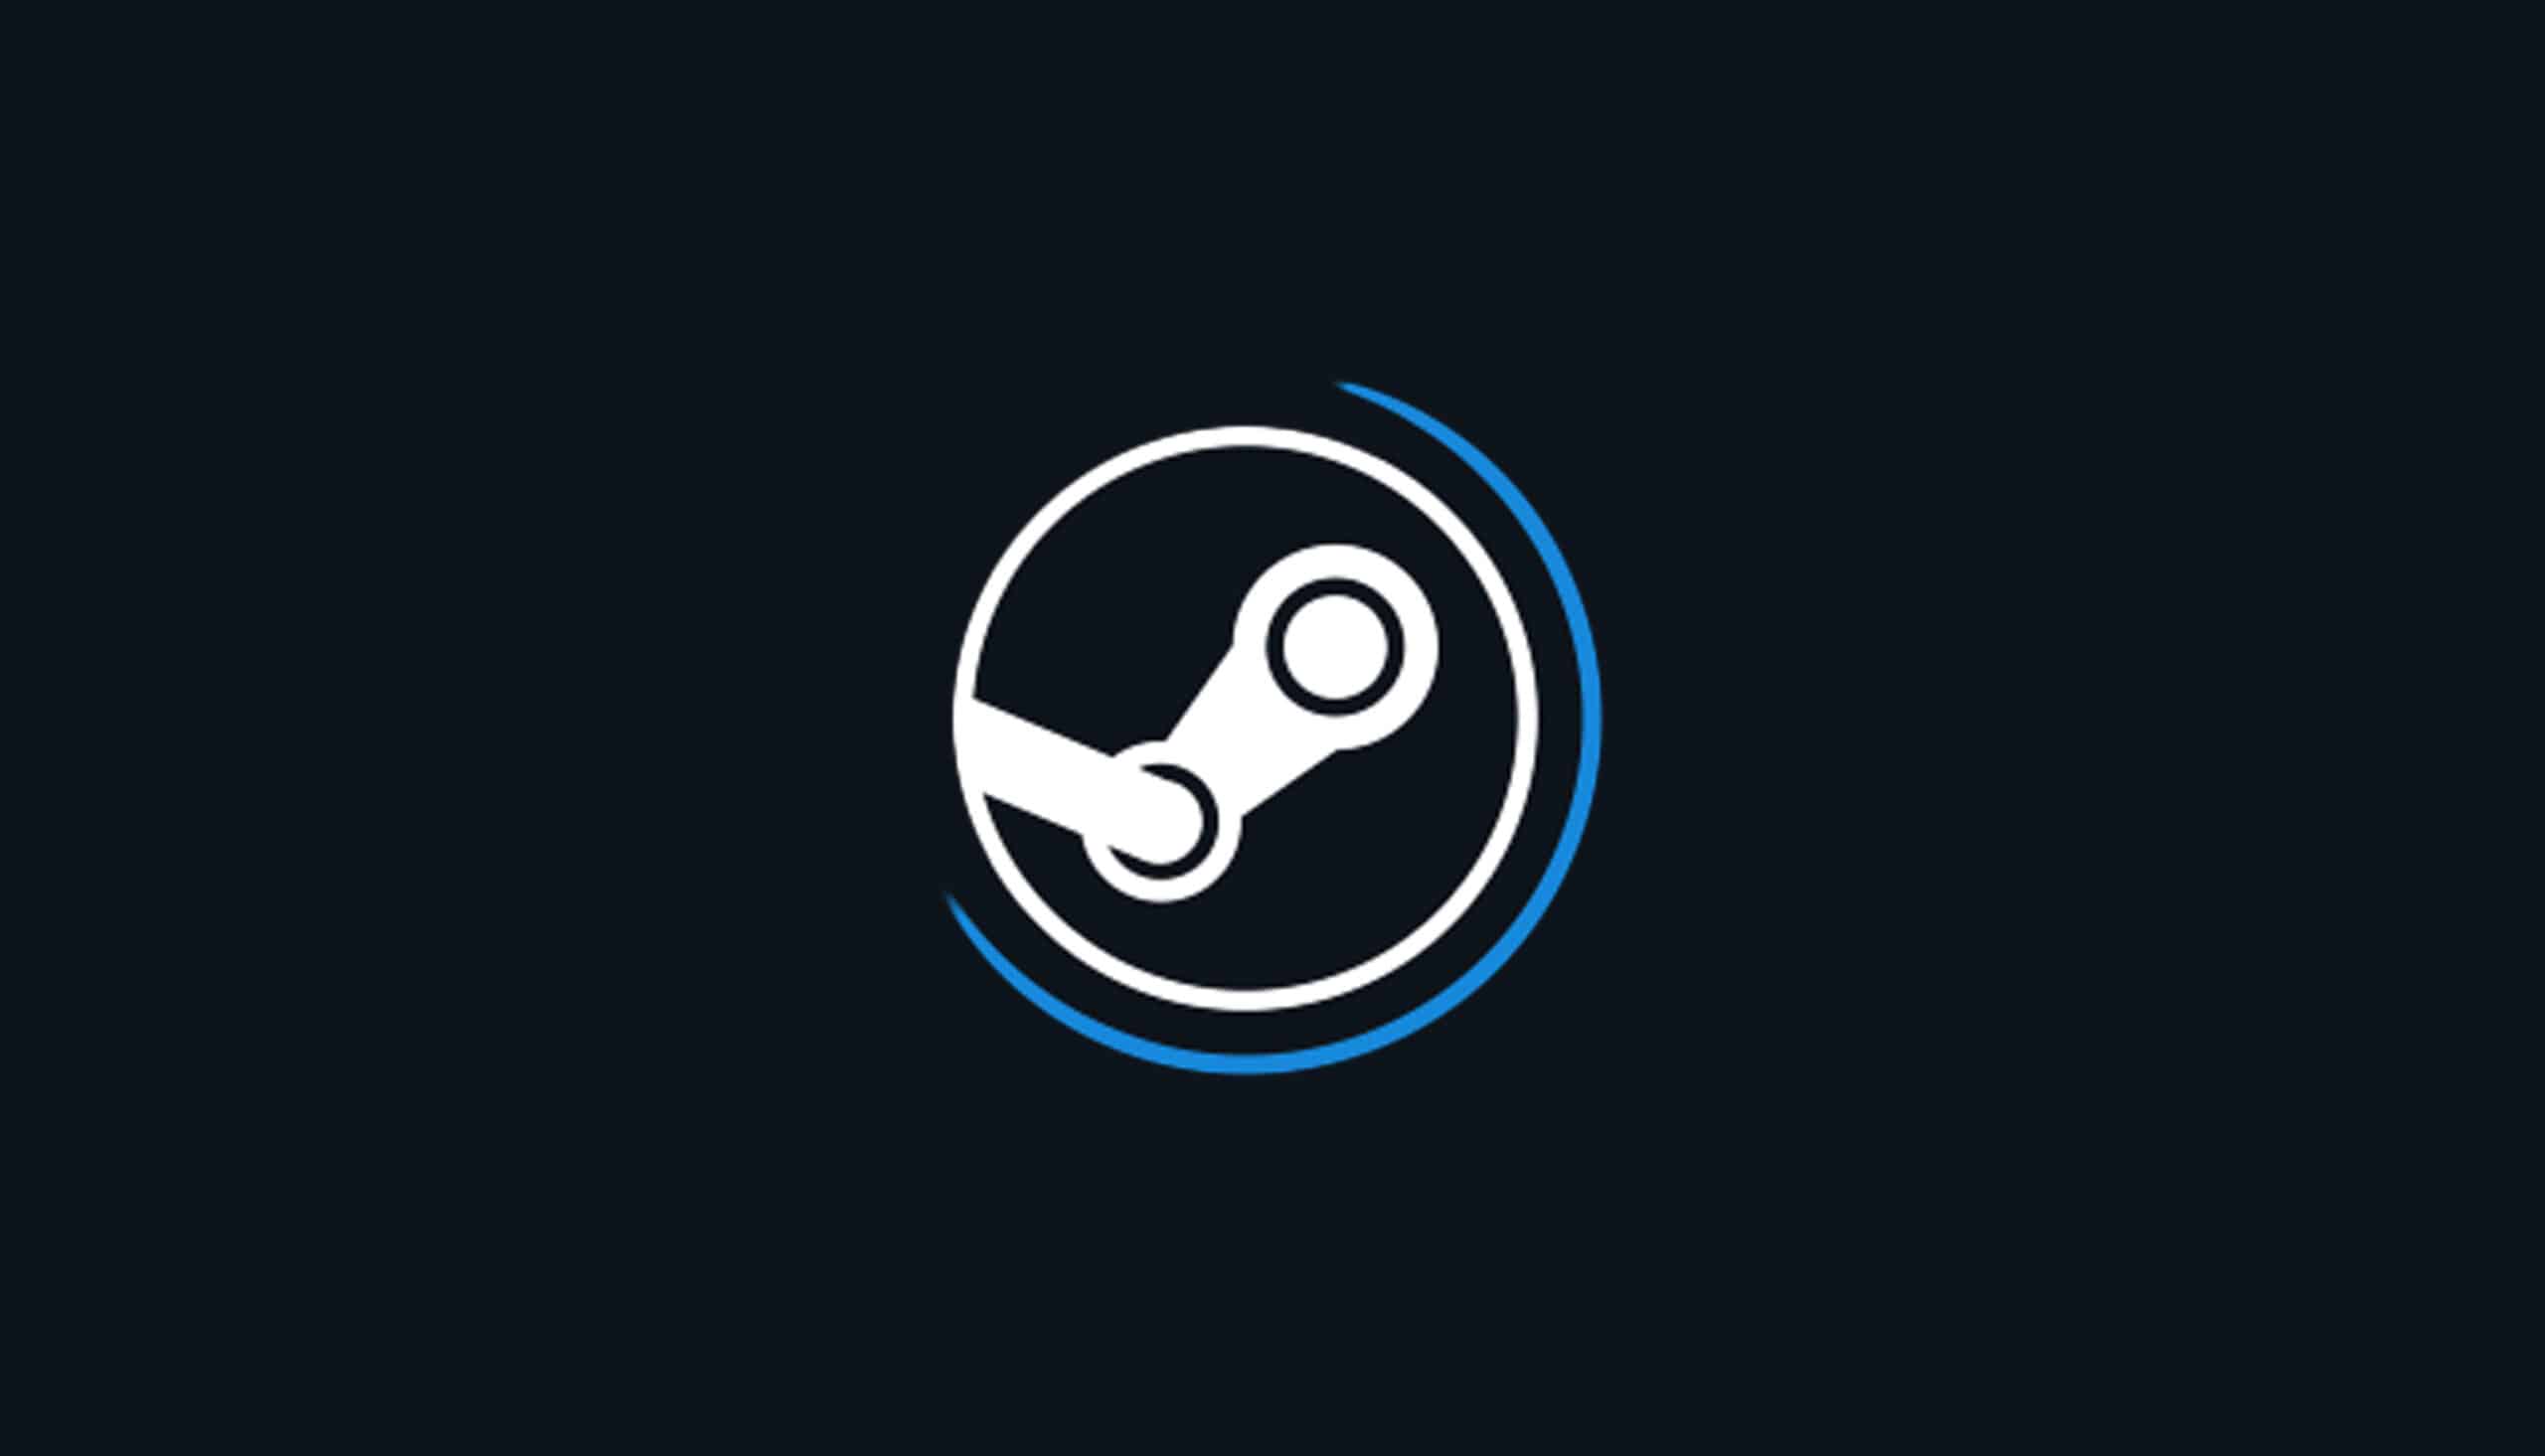 (Fixed) Steam is currently experiencing widespread outages